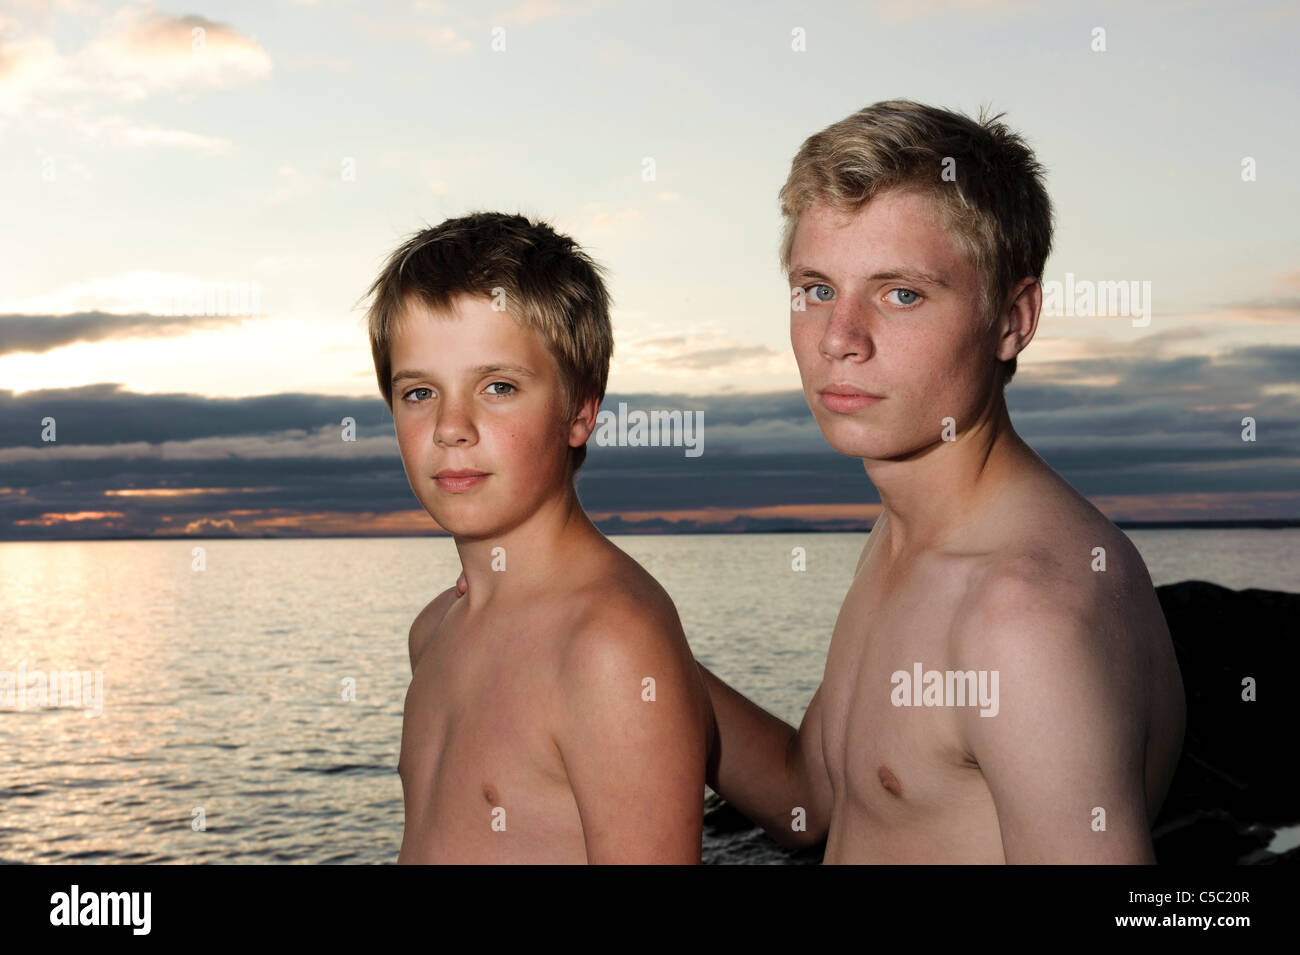 Portrait of two shirtless boys against the sea on a beach Stock Photo